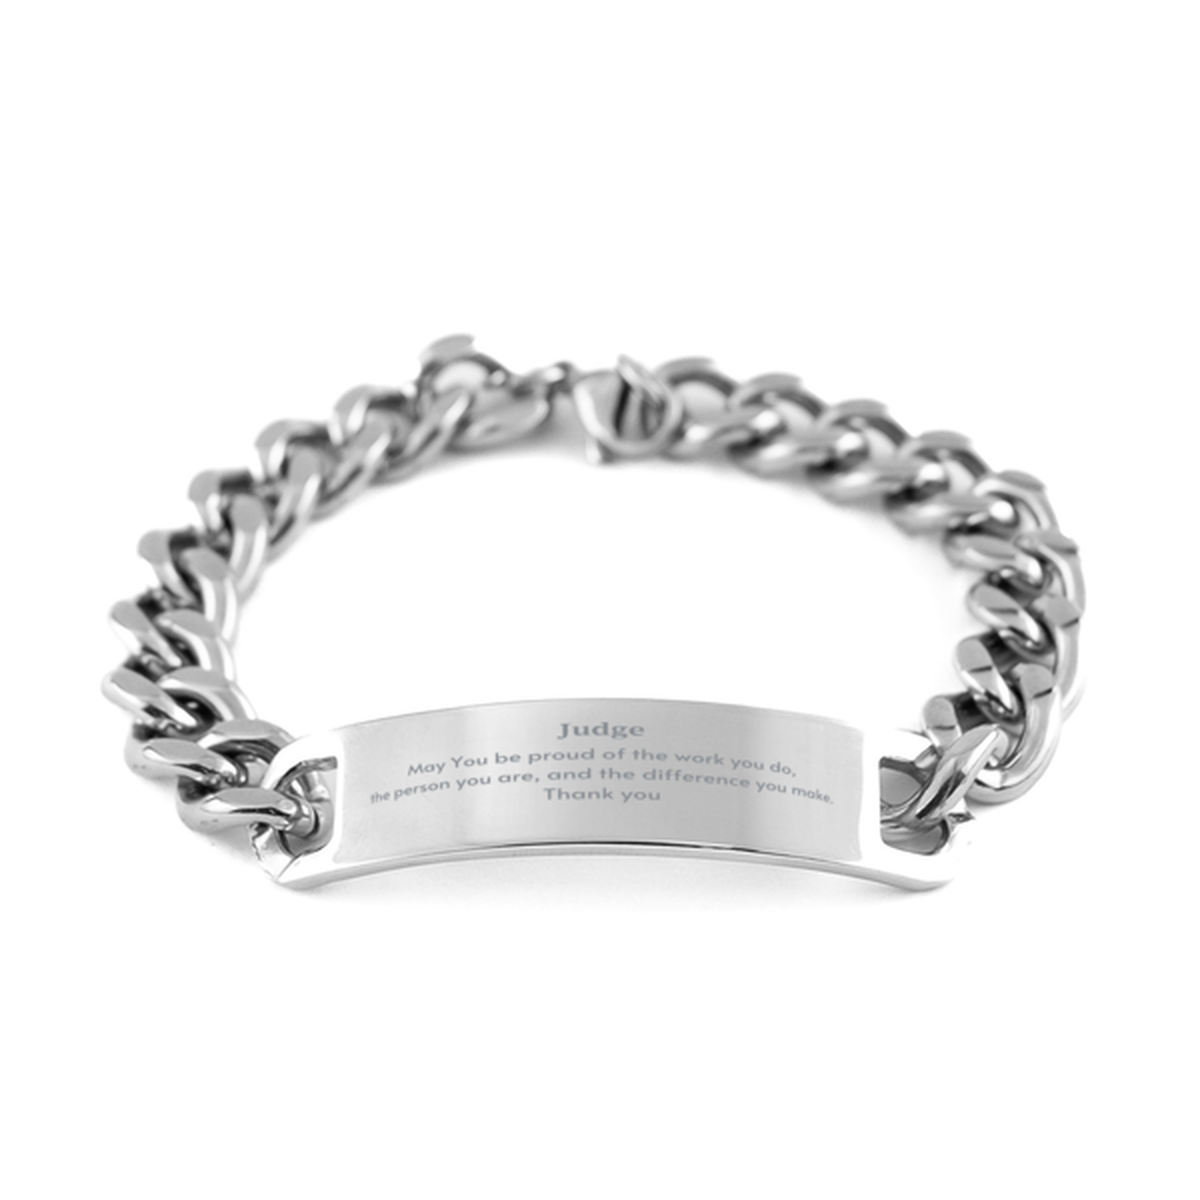 Heartwarming Cuban Chain Stainless Steel Bracelet Retirement Coworkers Gifts for Judge, Judge May You be proud of the work you do, the person you are Gifts for Boss Men Women Friends